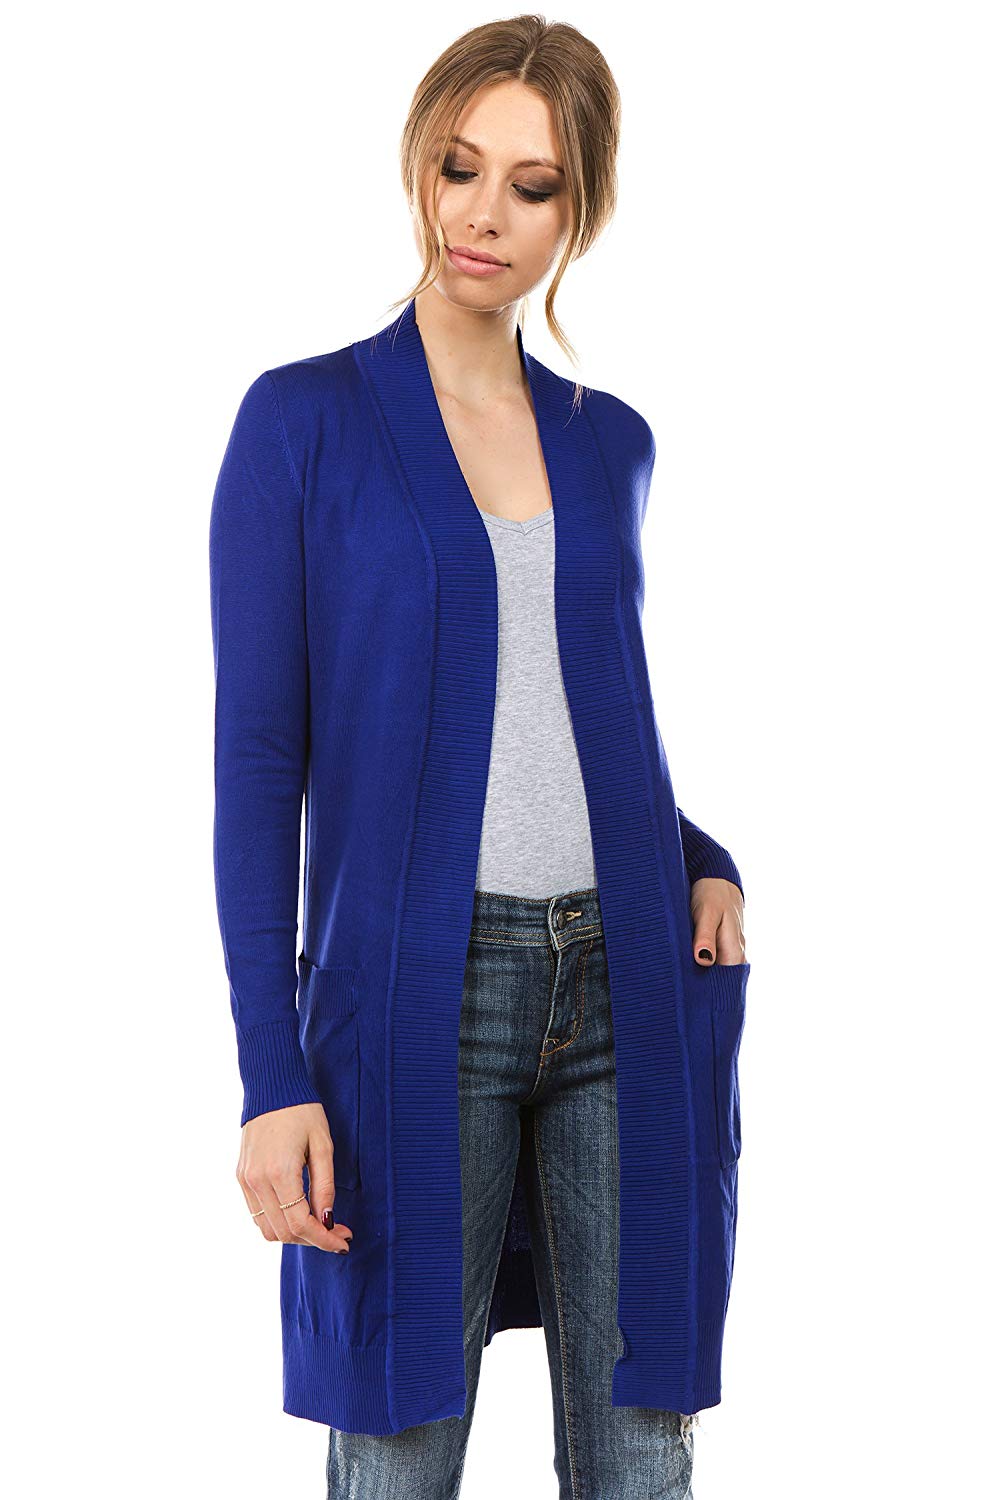 Hold you royal blue duster sweater shirts women